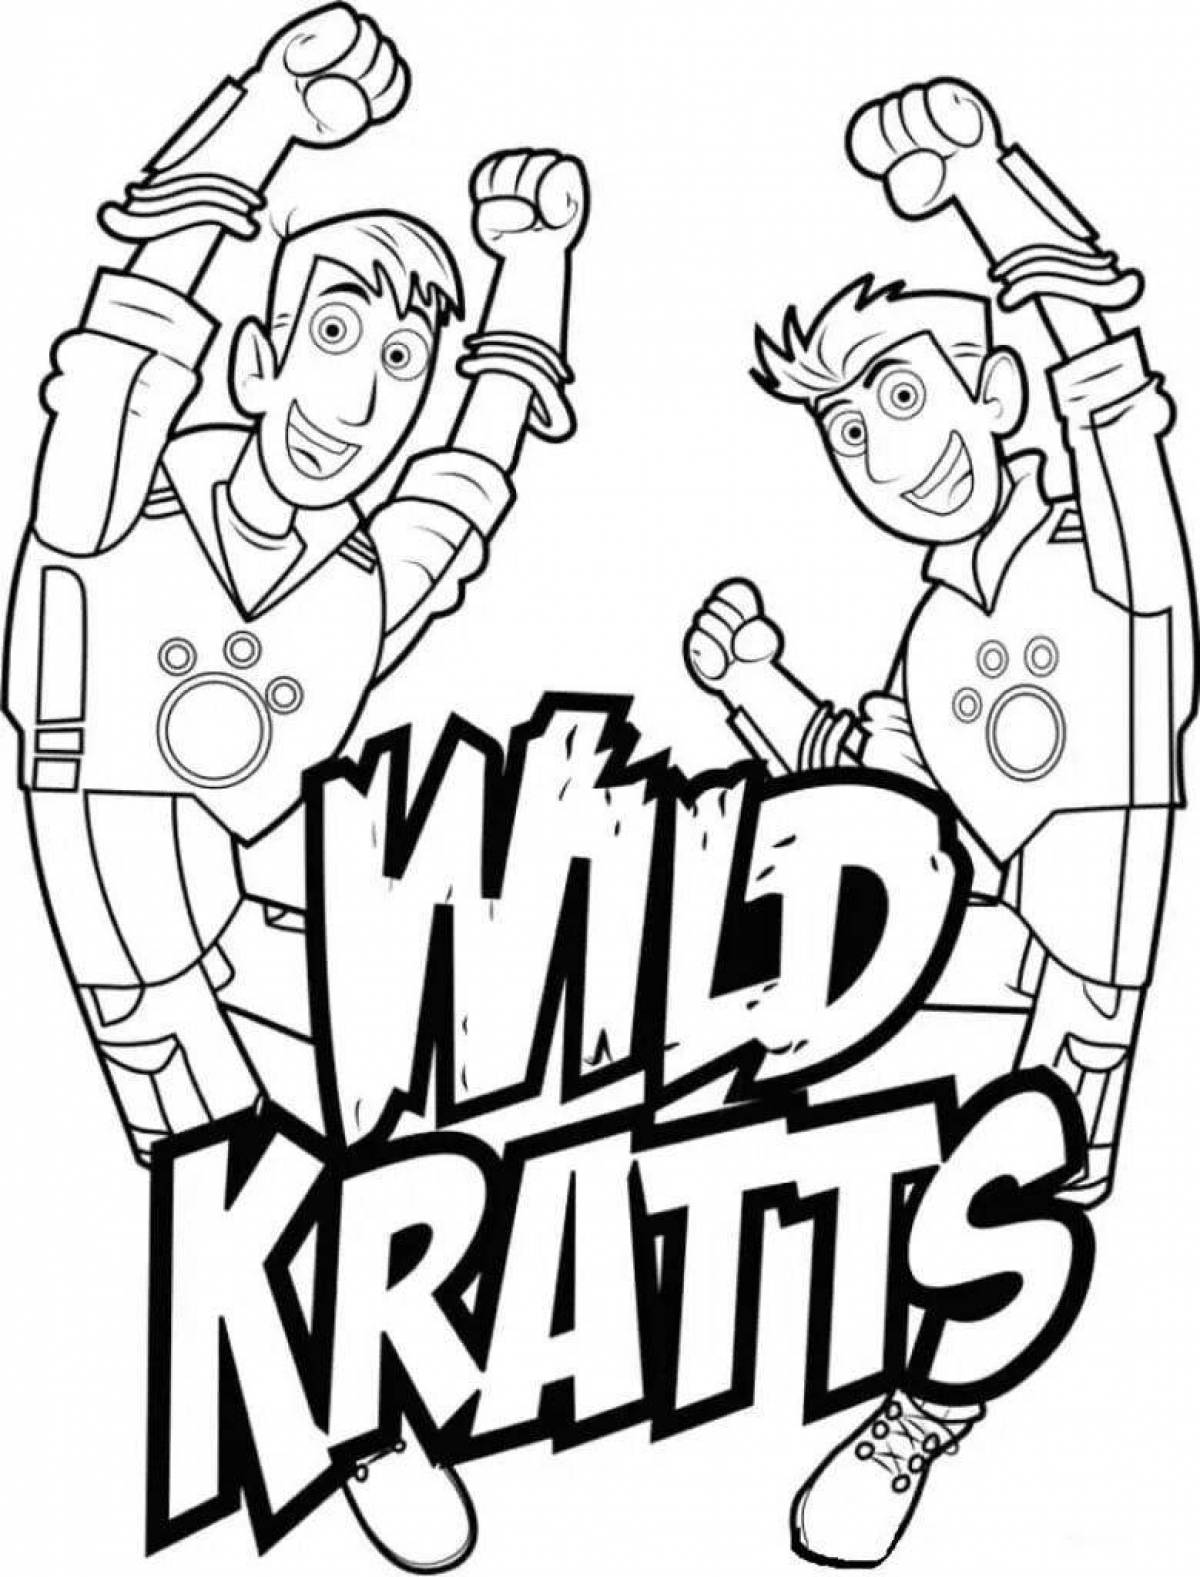 Kratt brothers colorful coloring page